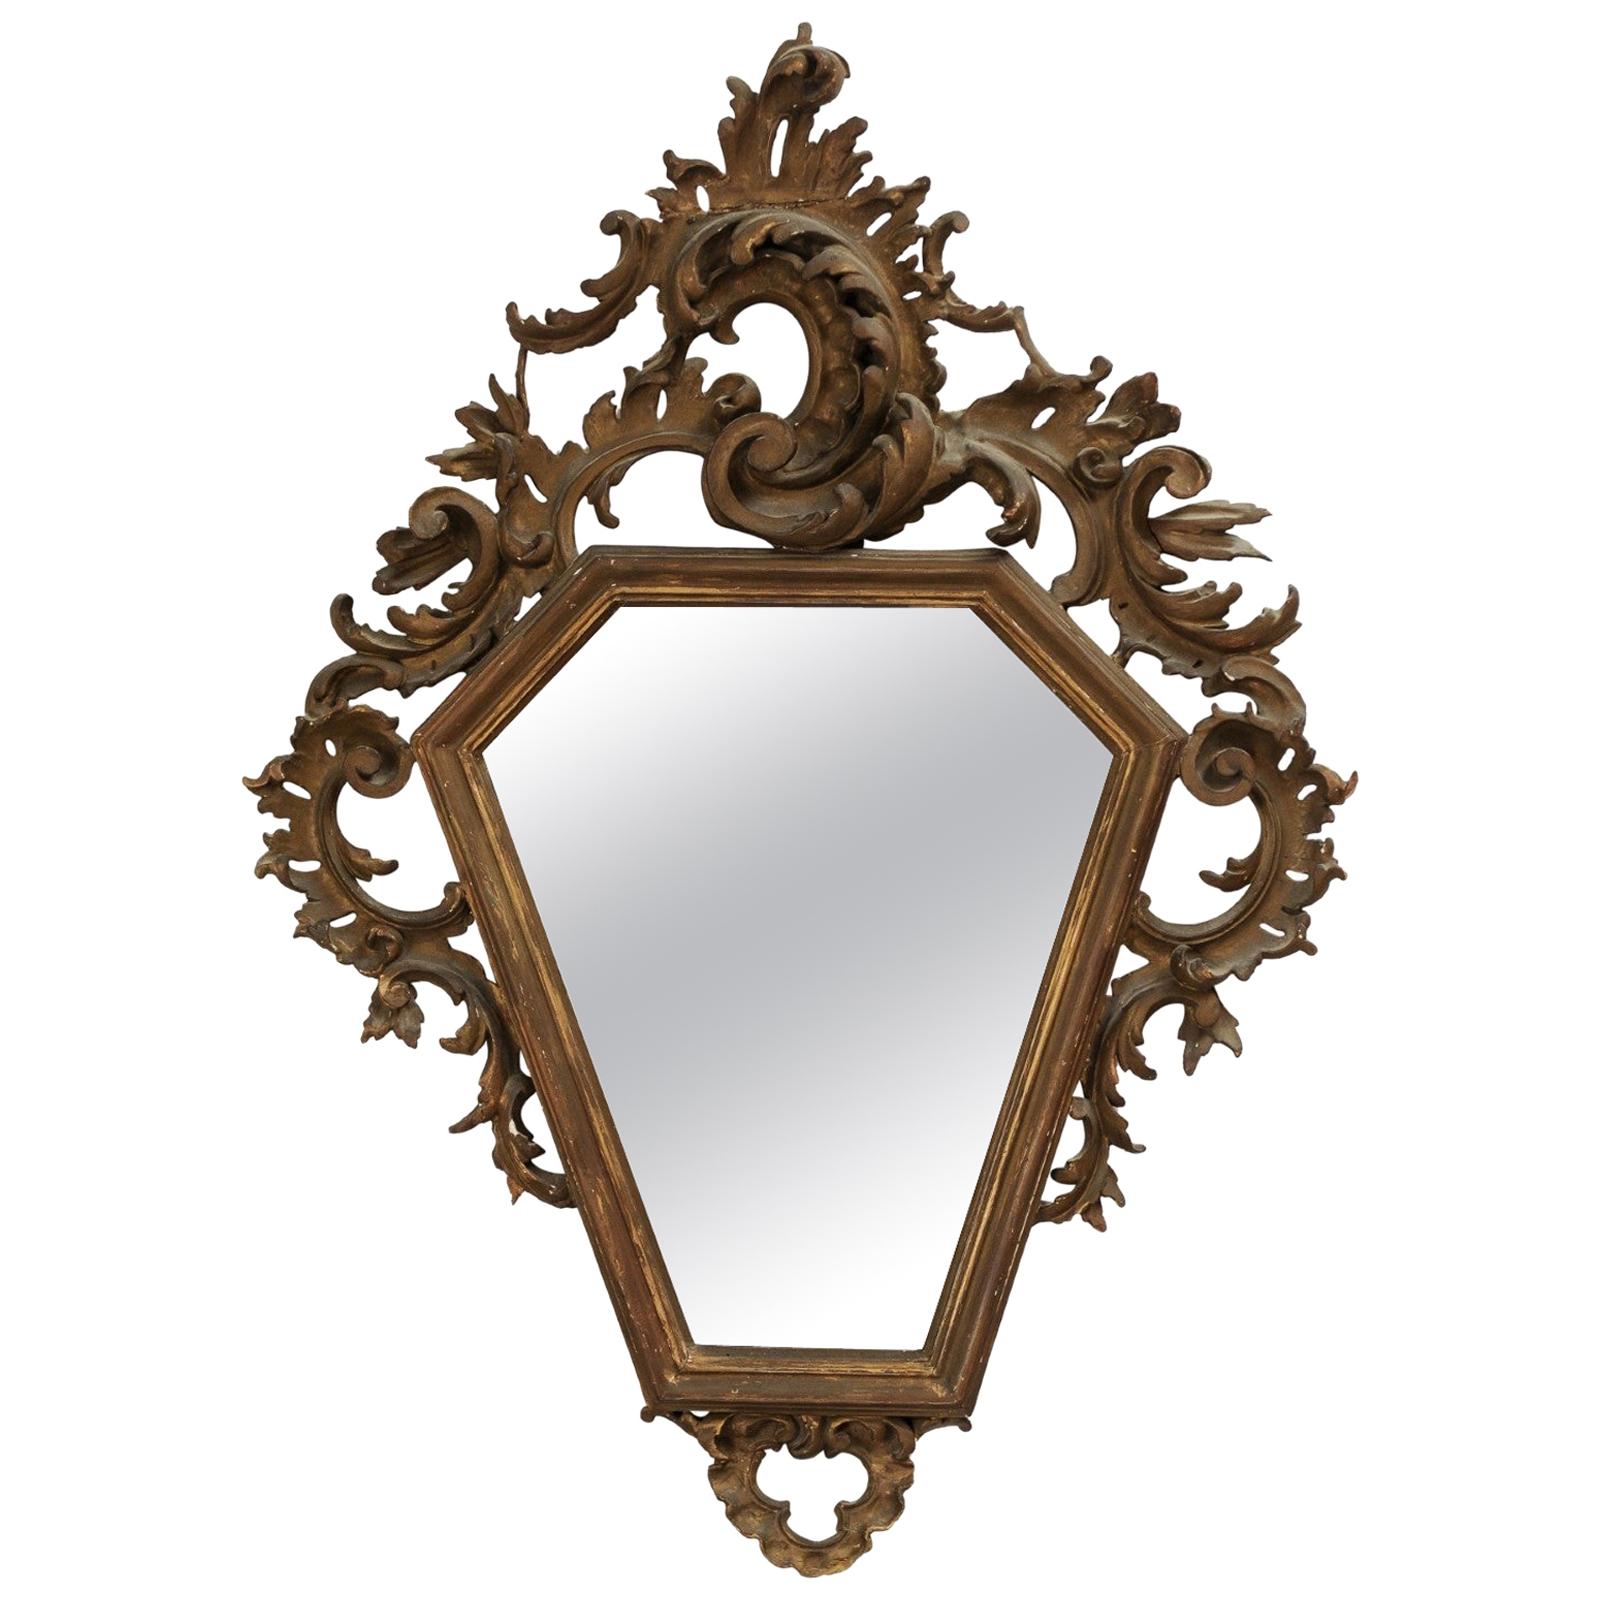 Italian 19th Century Rococo Style Carved Mirror with Traces of Gilt and Scrolls